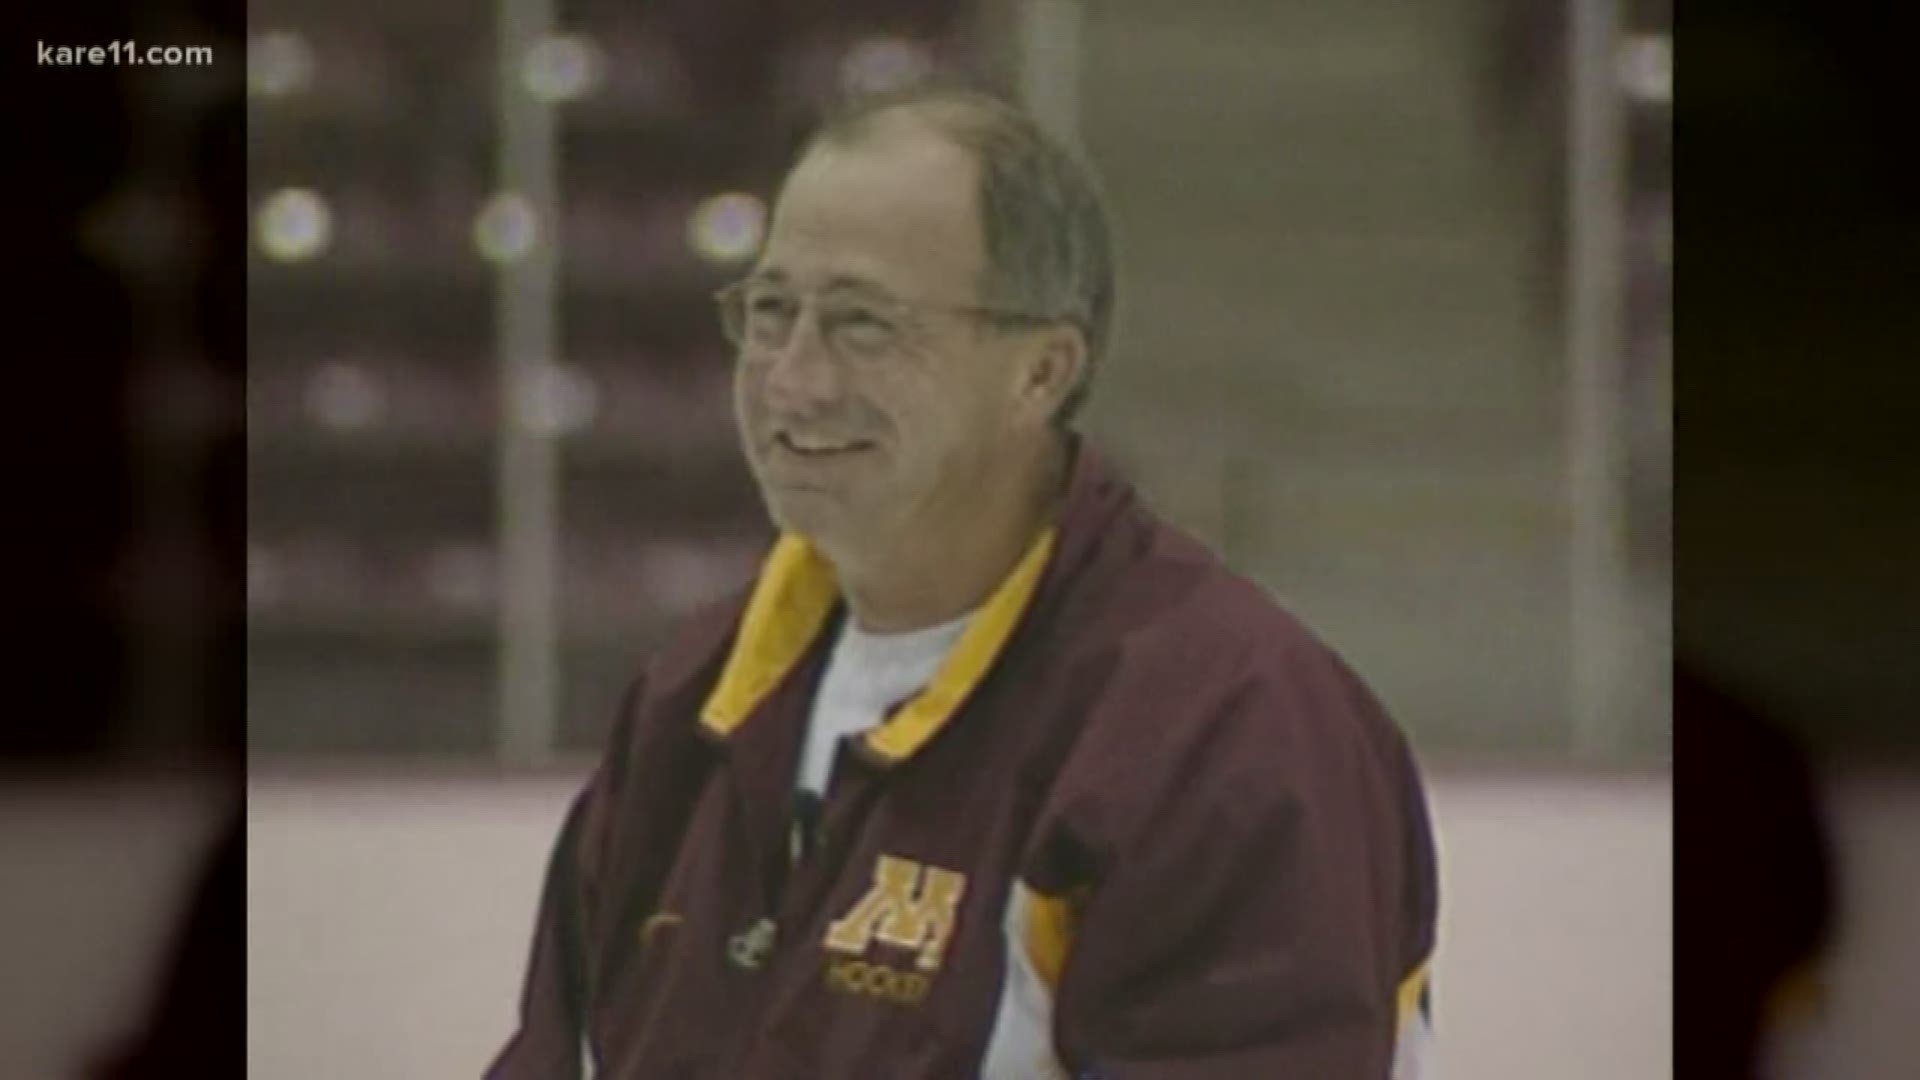 Woog was a renowned All-American athlete for the University of Minnesota Men's Hockey Team that was inducted into the U.S. hockey hall of fame in 2002.